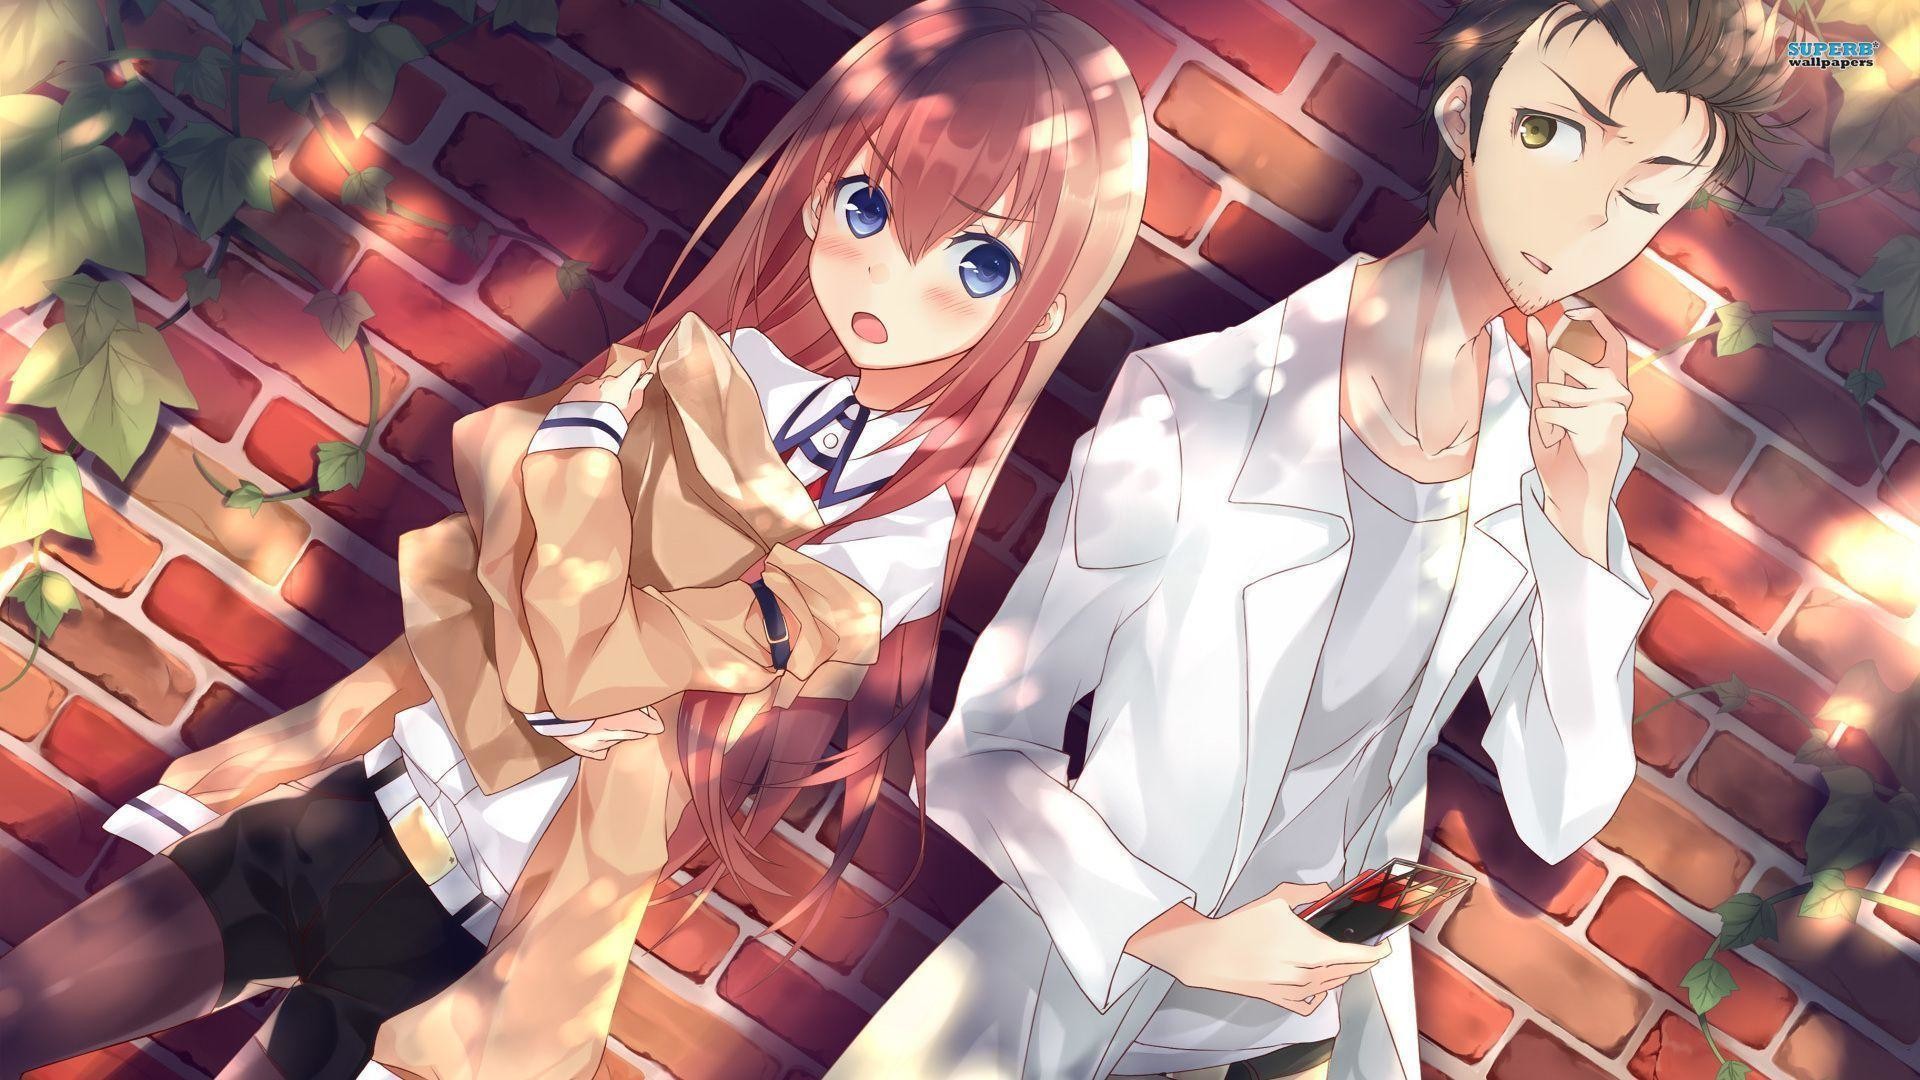 Steins Gate Anime Couple Wallpapers - Cute Couple Wallpaper Anime - HD Wallpaper 